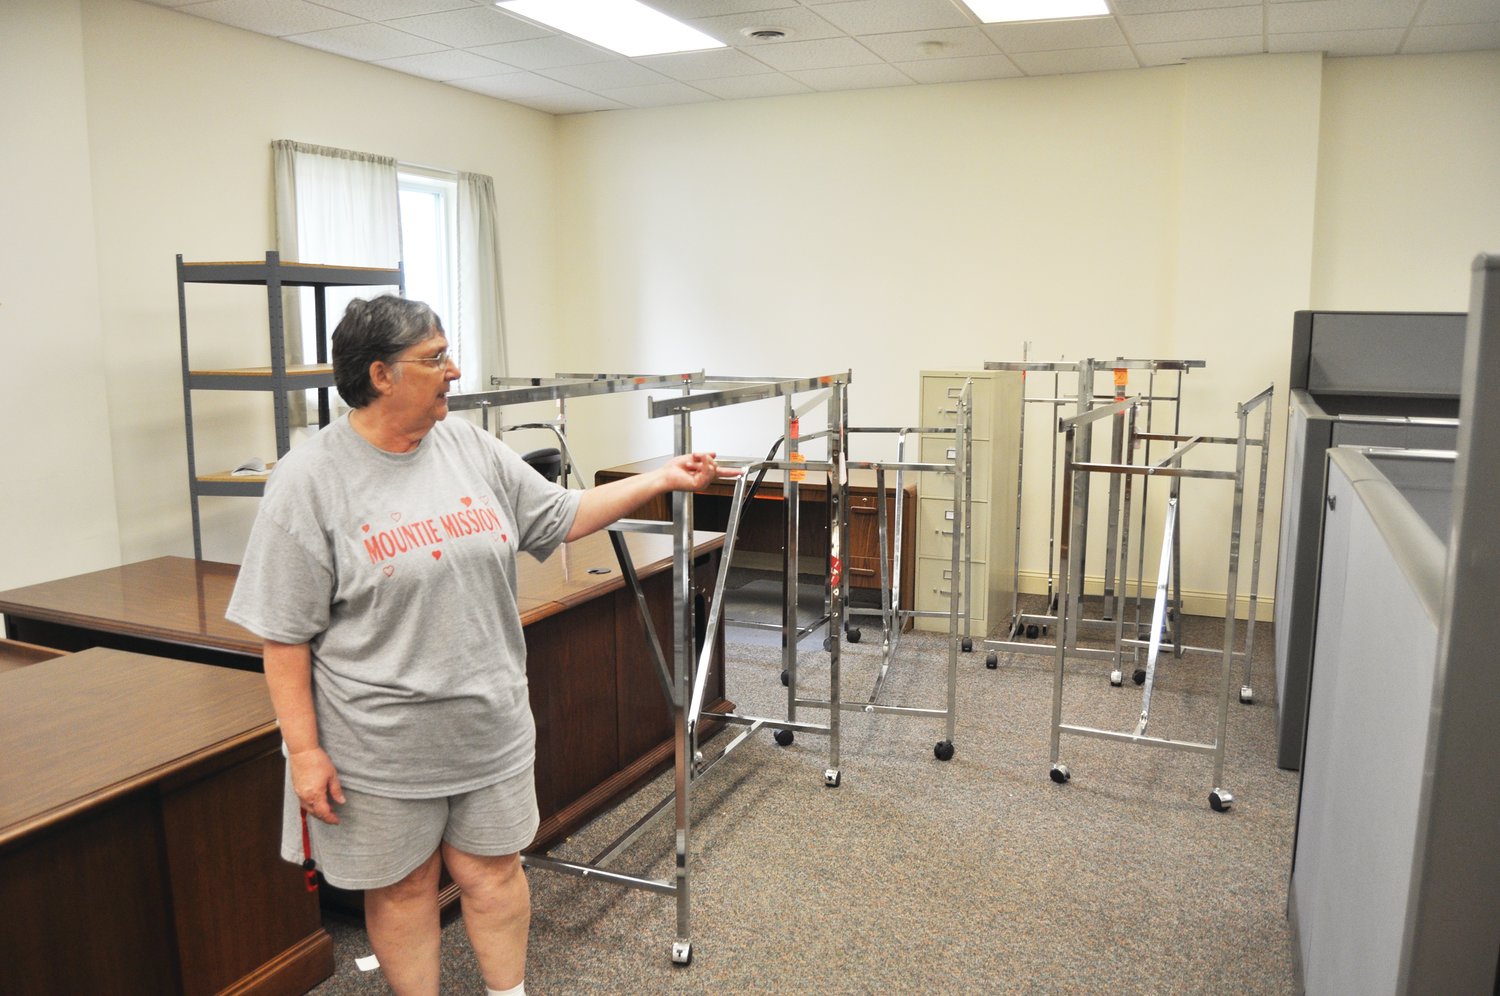 Diane Cross, founder of Mountie Mission, points to cubicles in a vacated Hoosier Heartland State Bank building the agency plans to purchase for additional space.